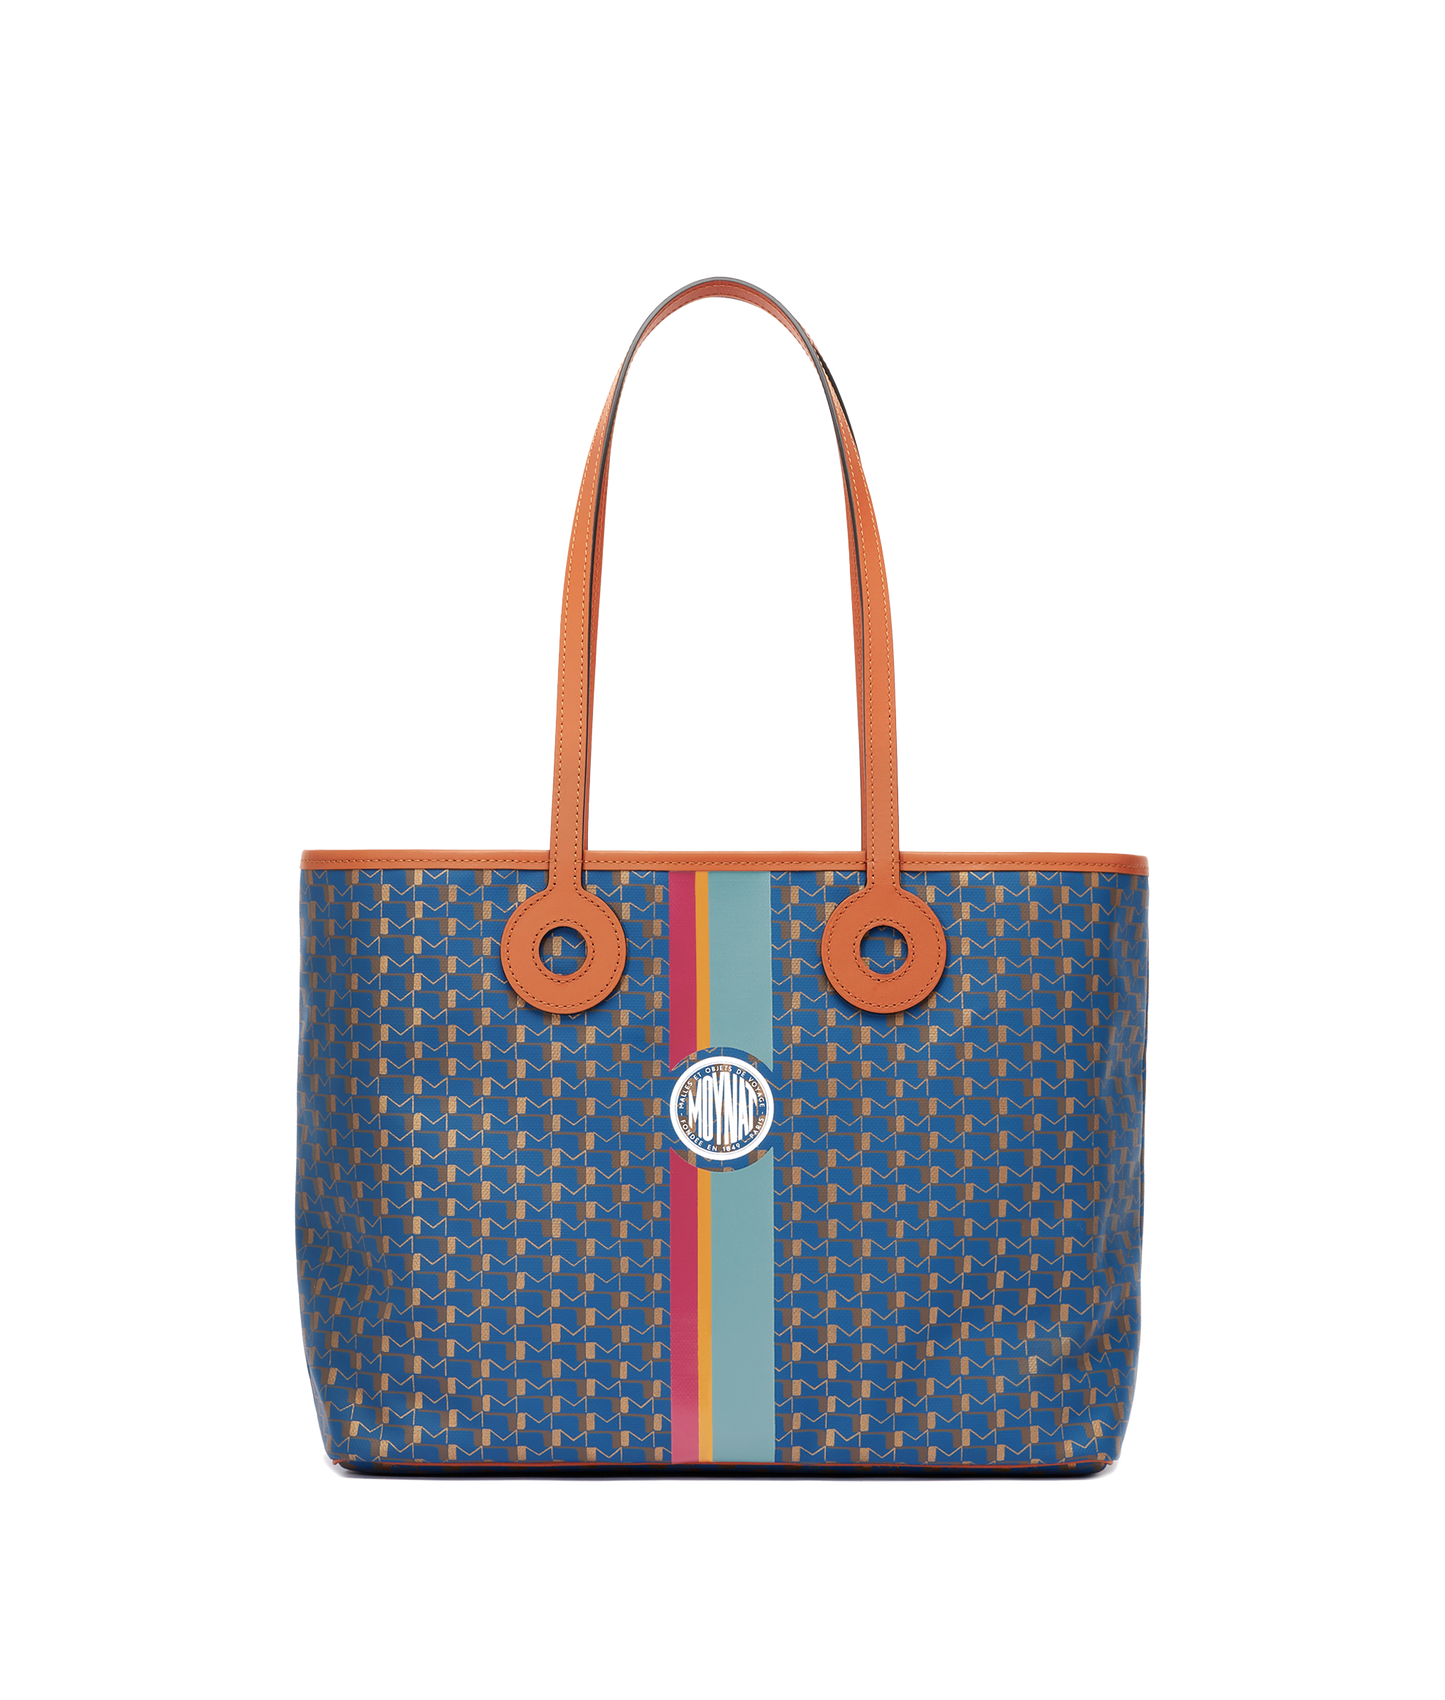 Moynat OH Tote carbon silver leather GM size - The Luxury Flavor